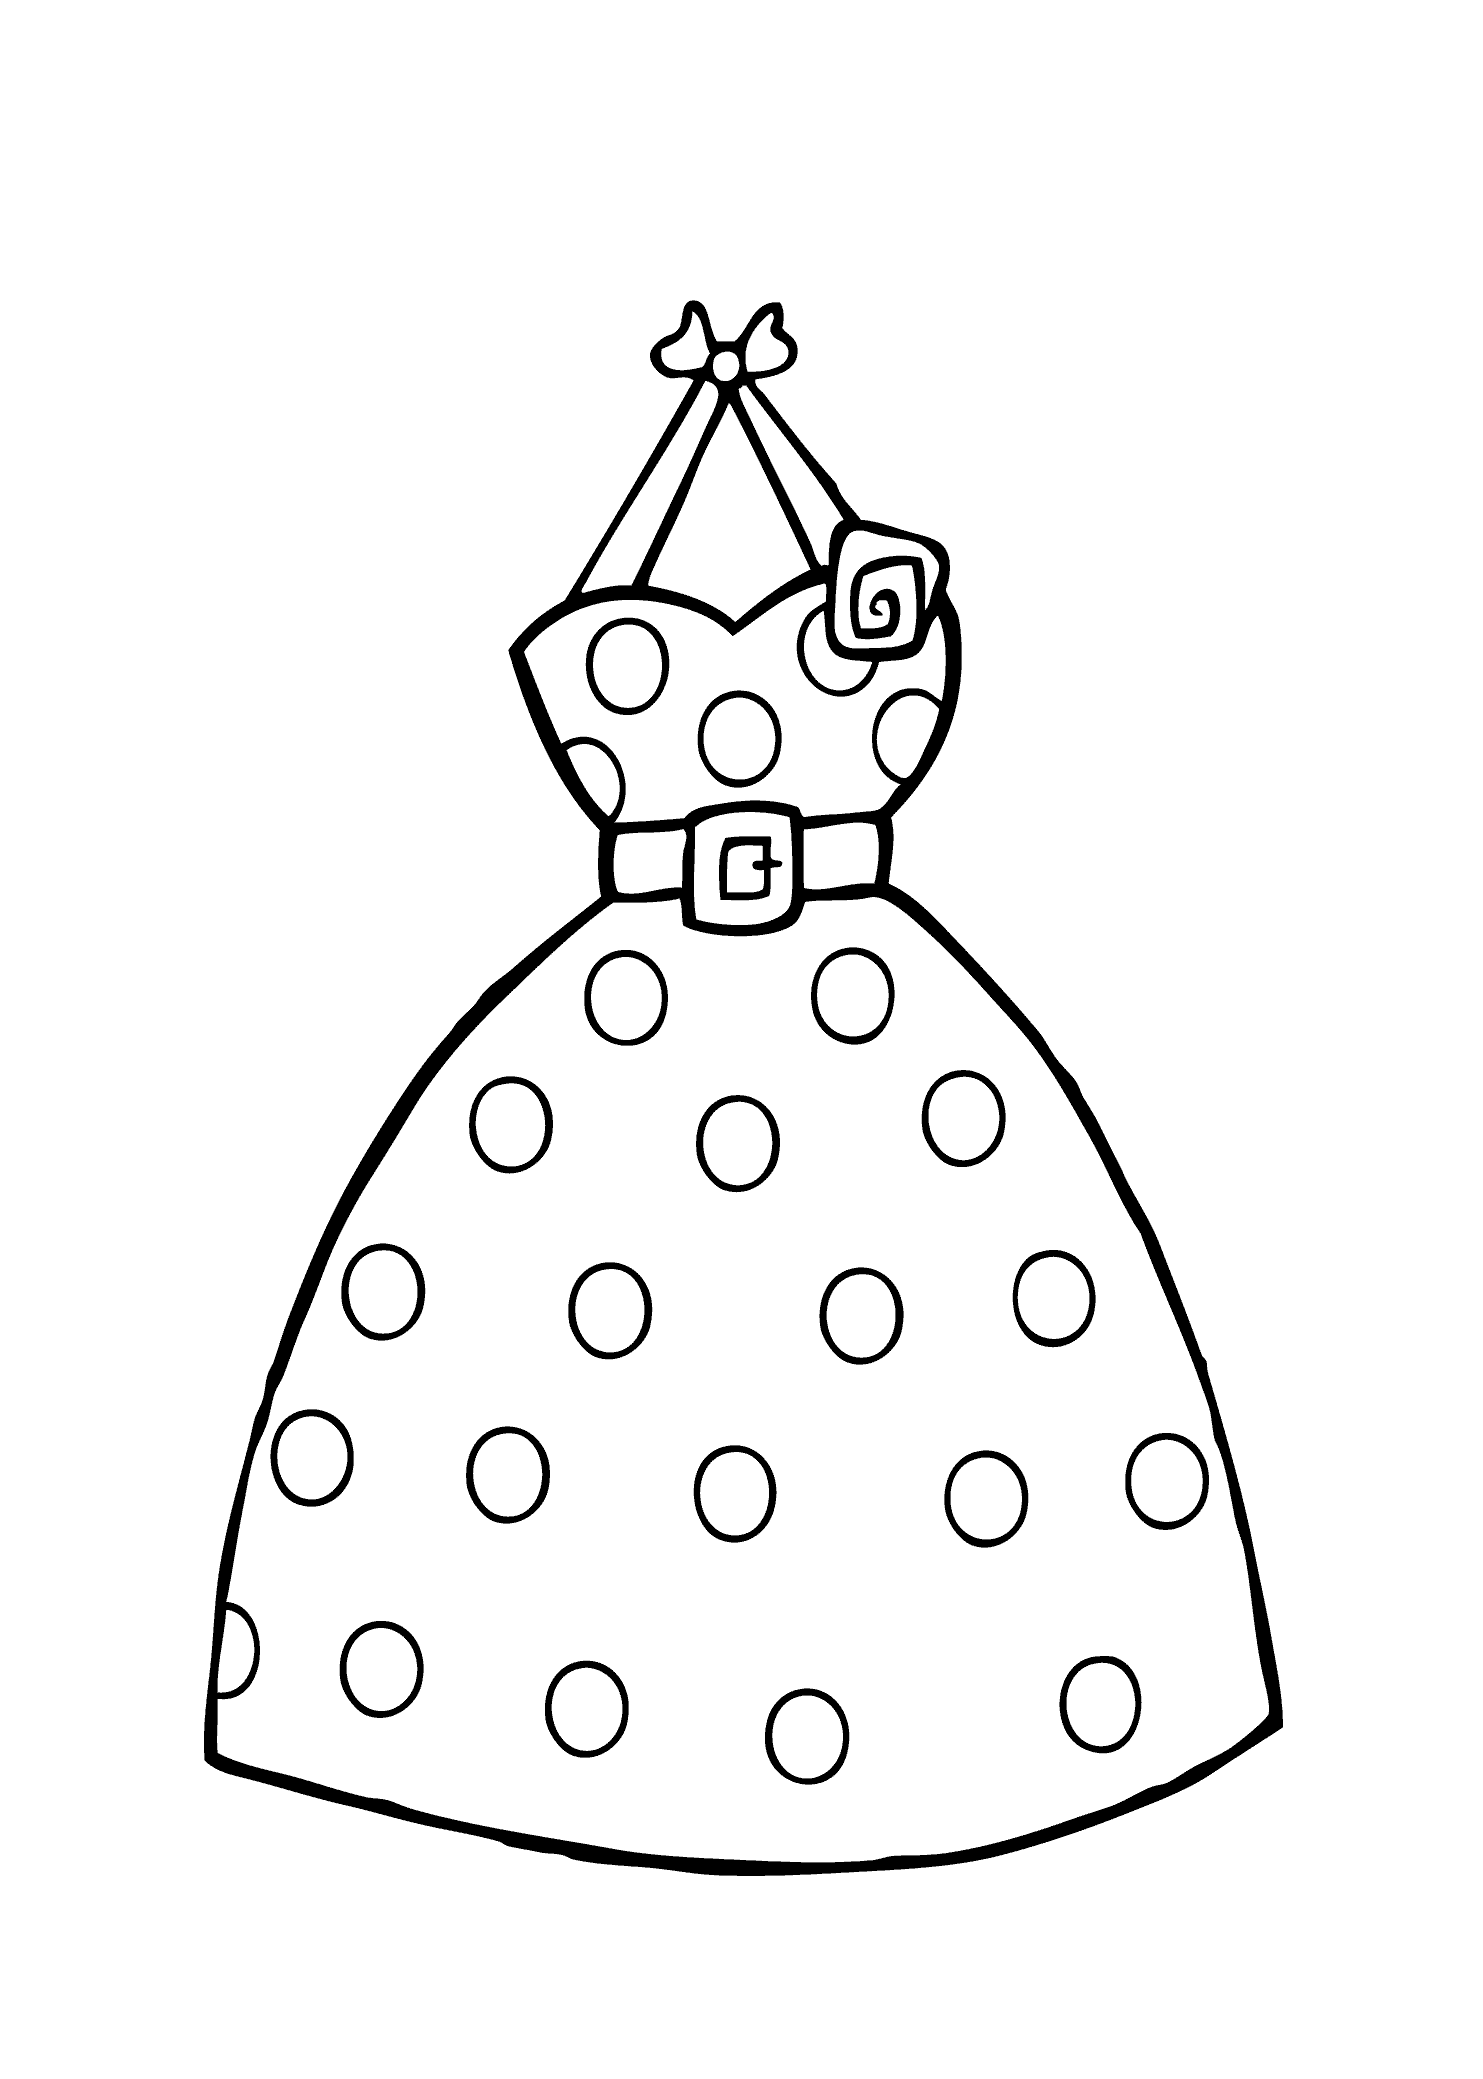 Clothing Stores Coloring Pages | Coloring Pages For All Ages